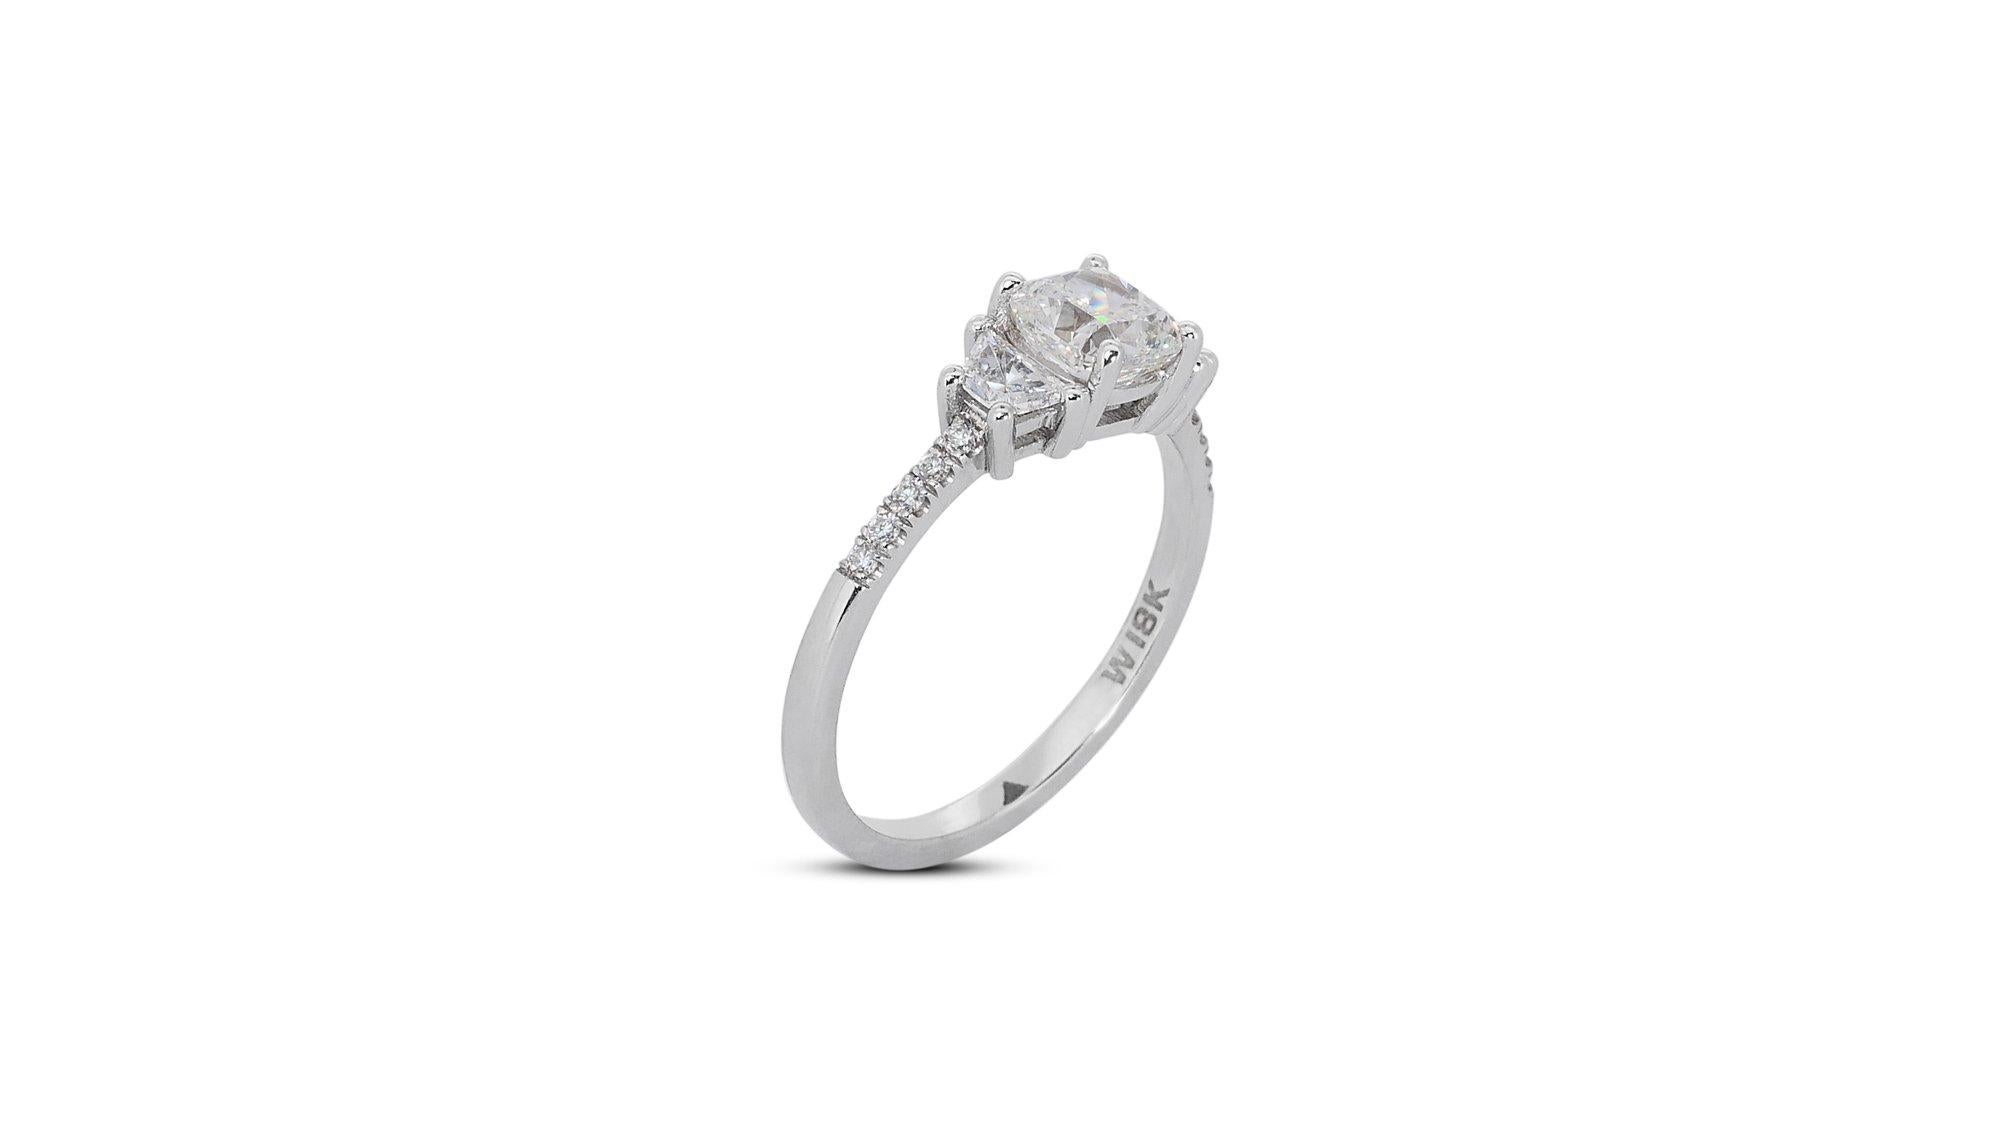 Marvelous 18k White Gold Ring with 1.48 ct Total Natural Diamonds - GIA Cert For Sale 4